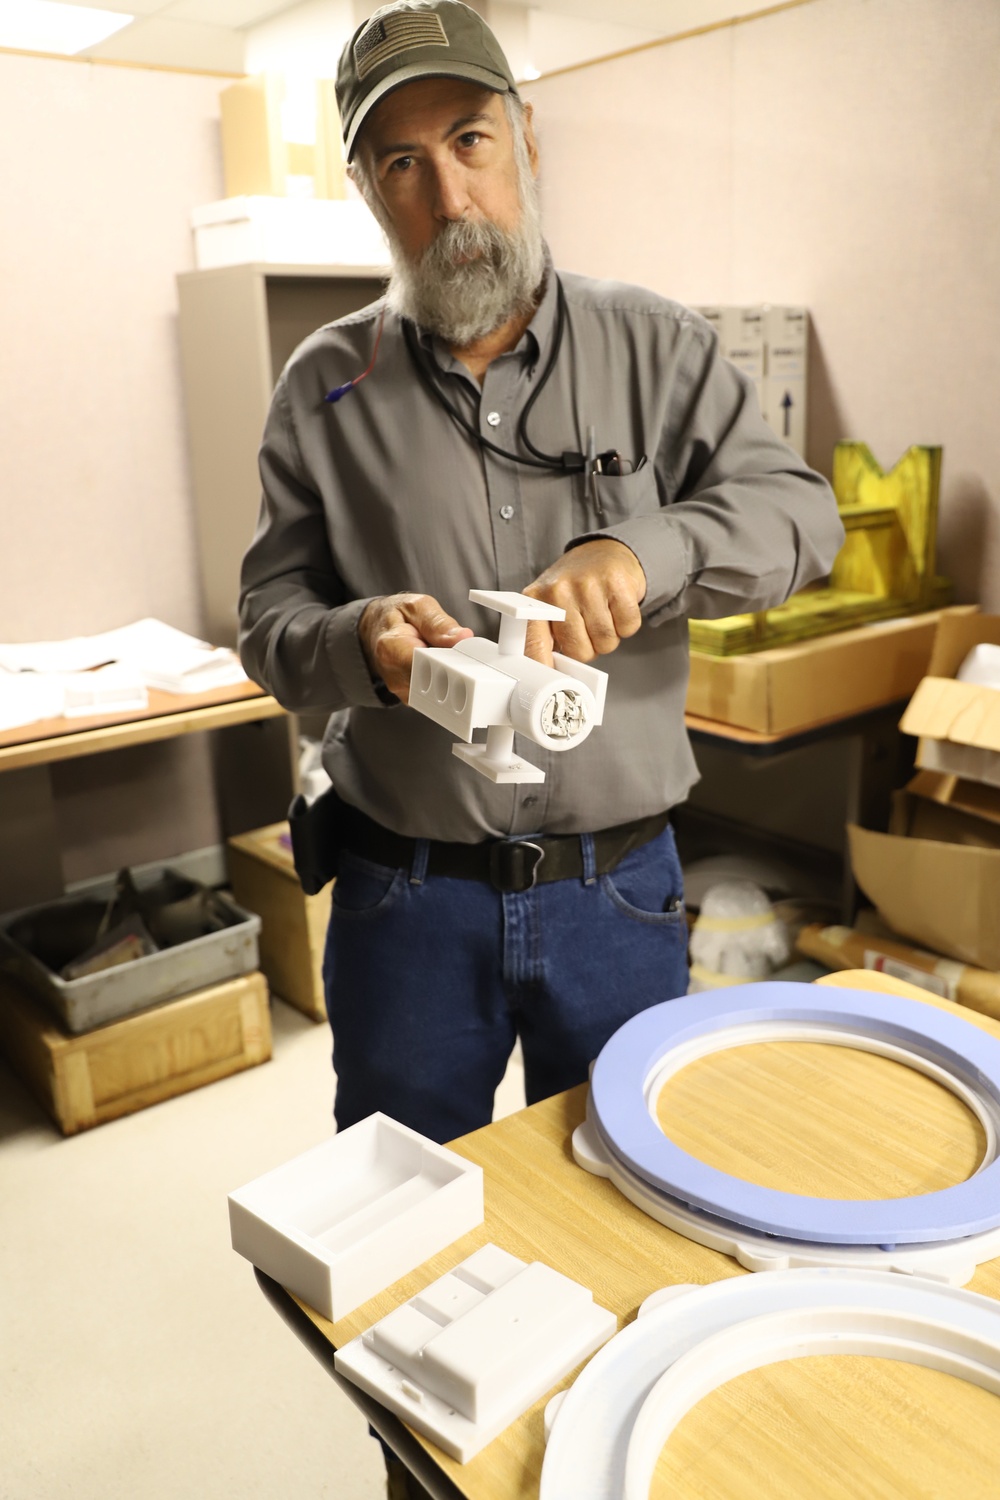 CCAD embraces additive manufacturing - a new pipeline for parts